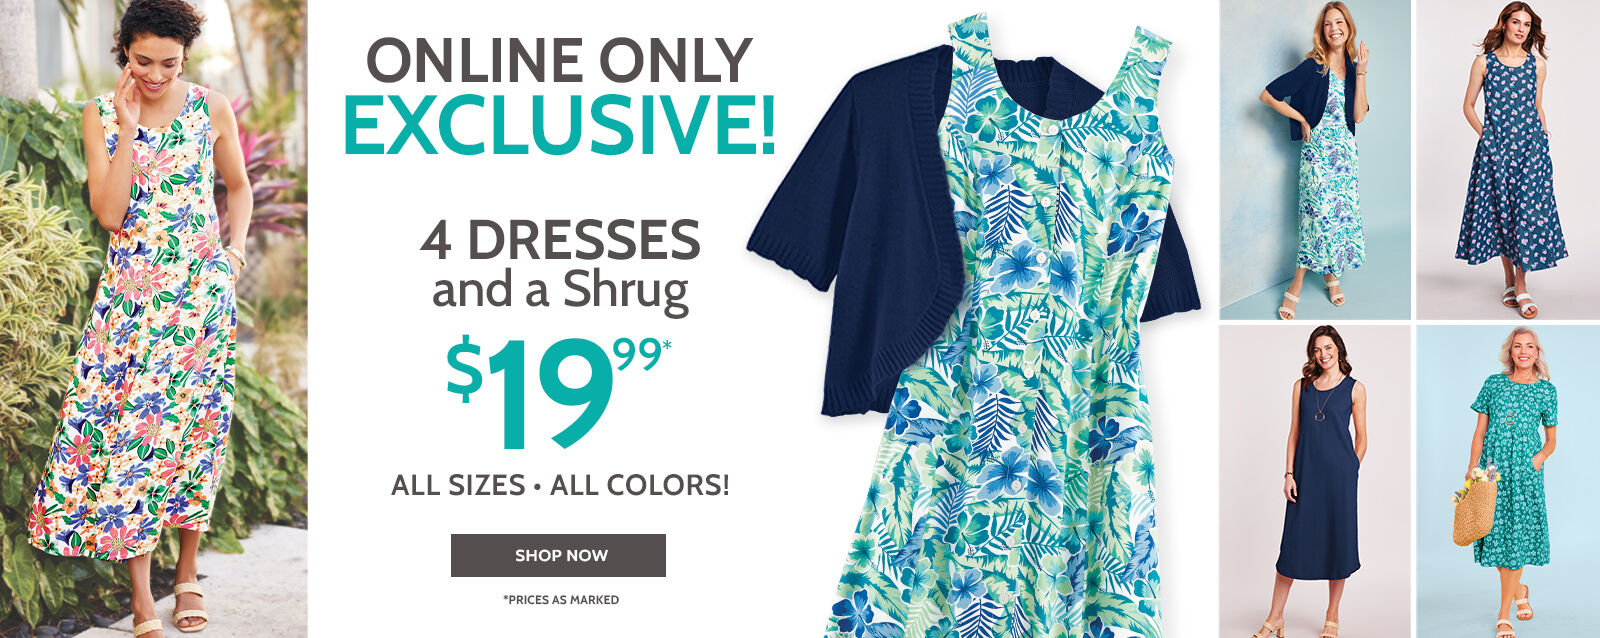 Online Only Exclusive! 4 Dresses and a Shrug. Shop Now. All sizes, all colors! $19.99